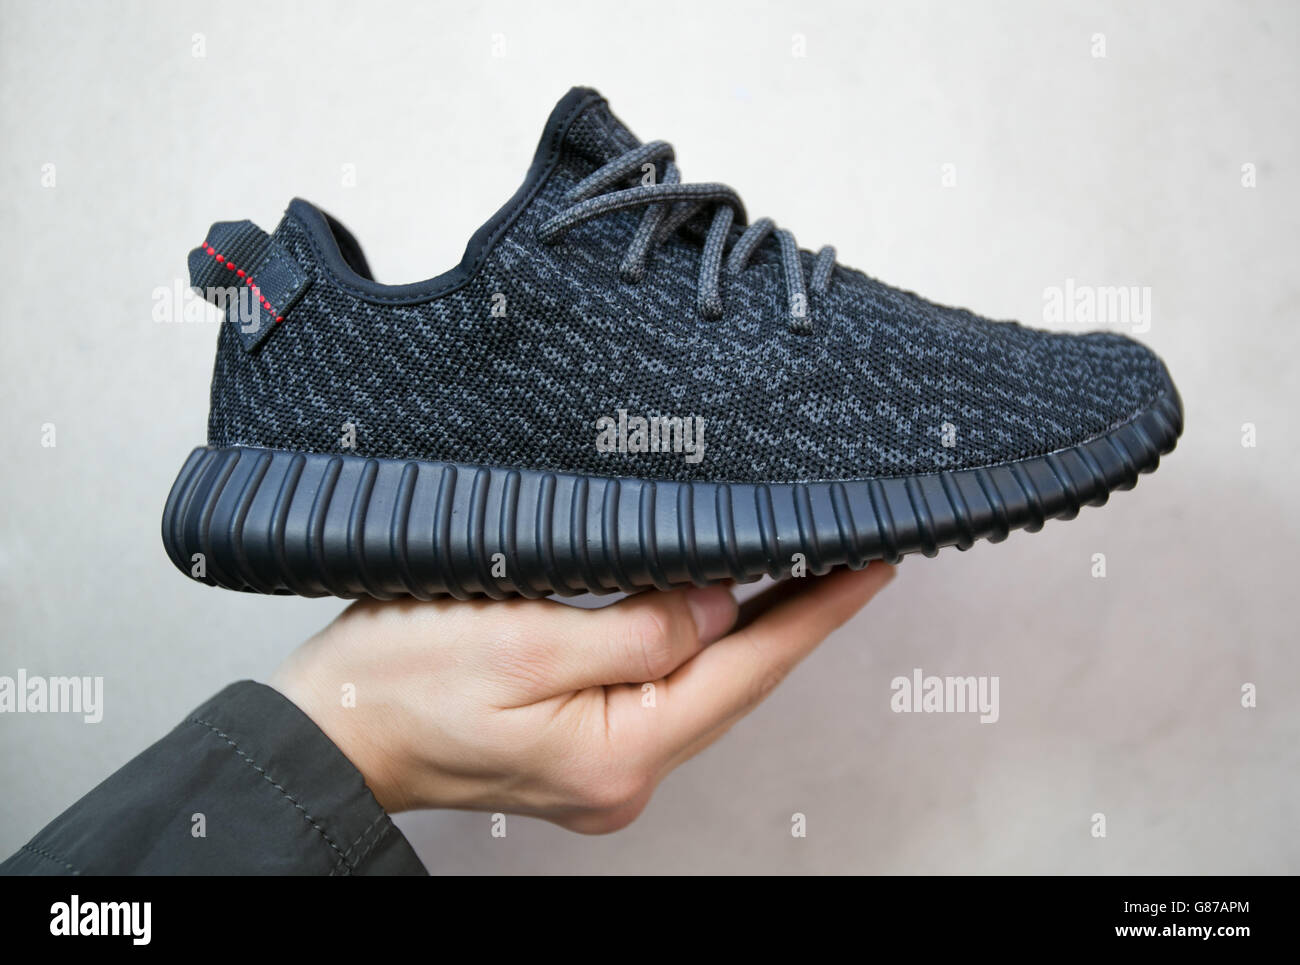 Adidas Yeezy Boost 350 trainers Stock 